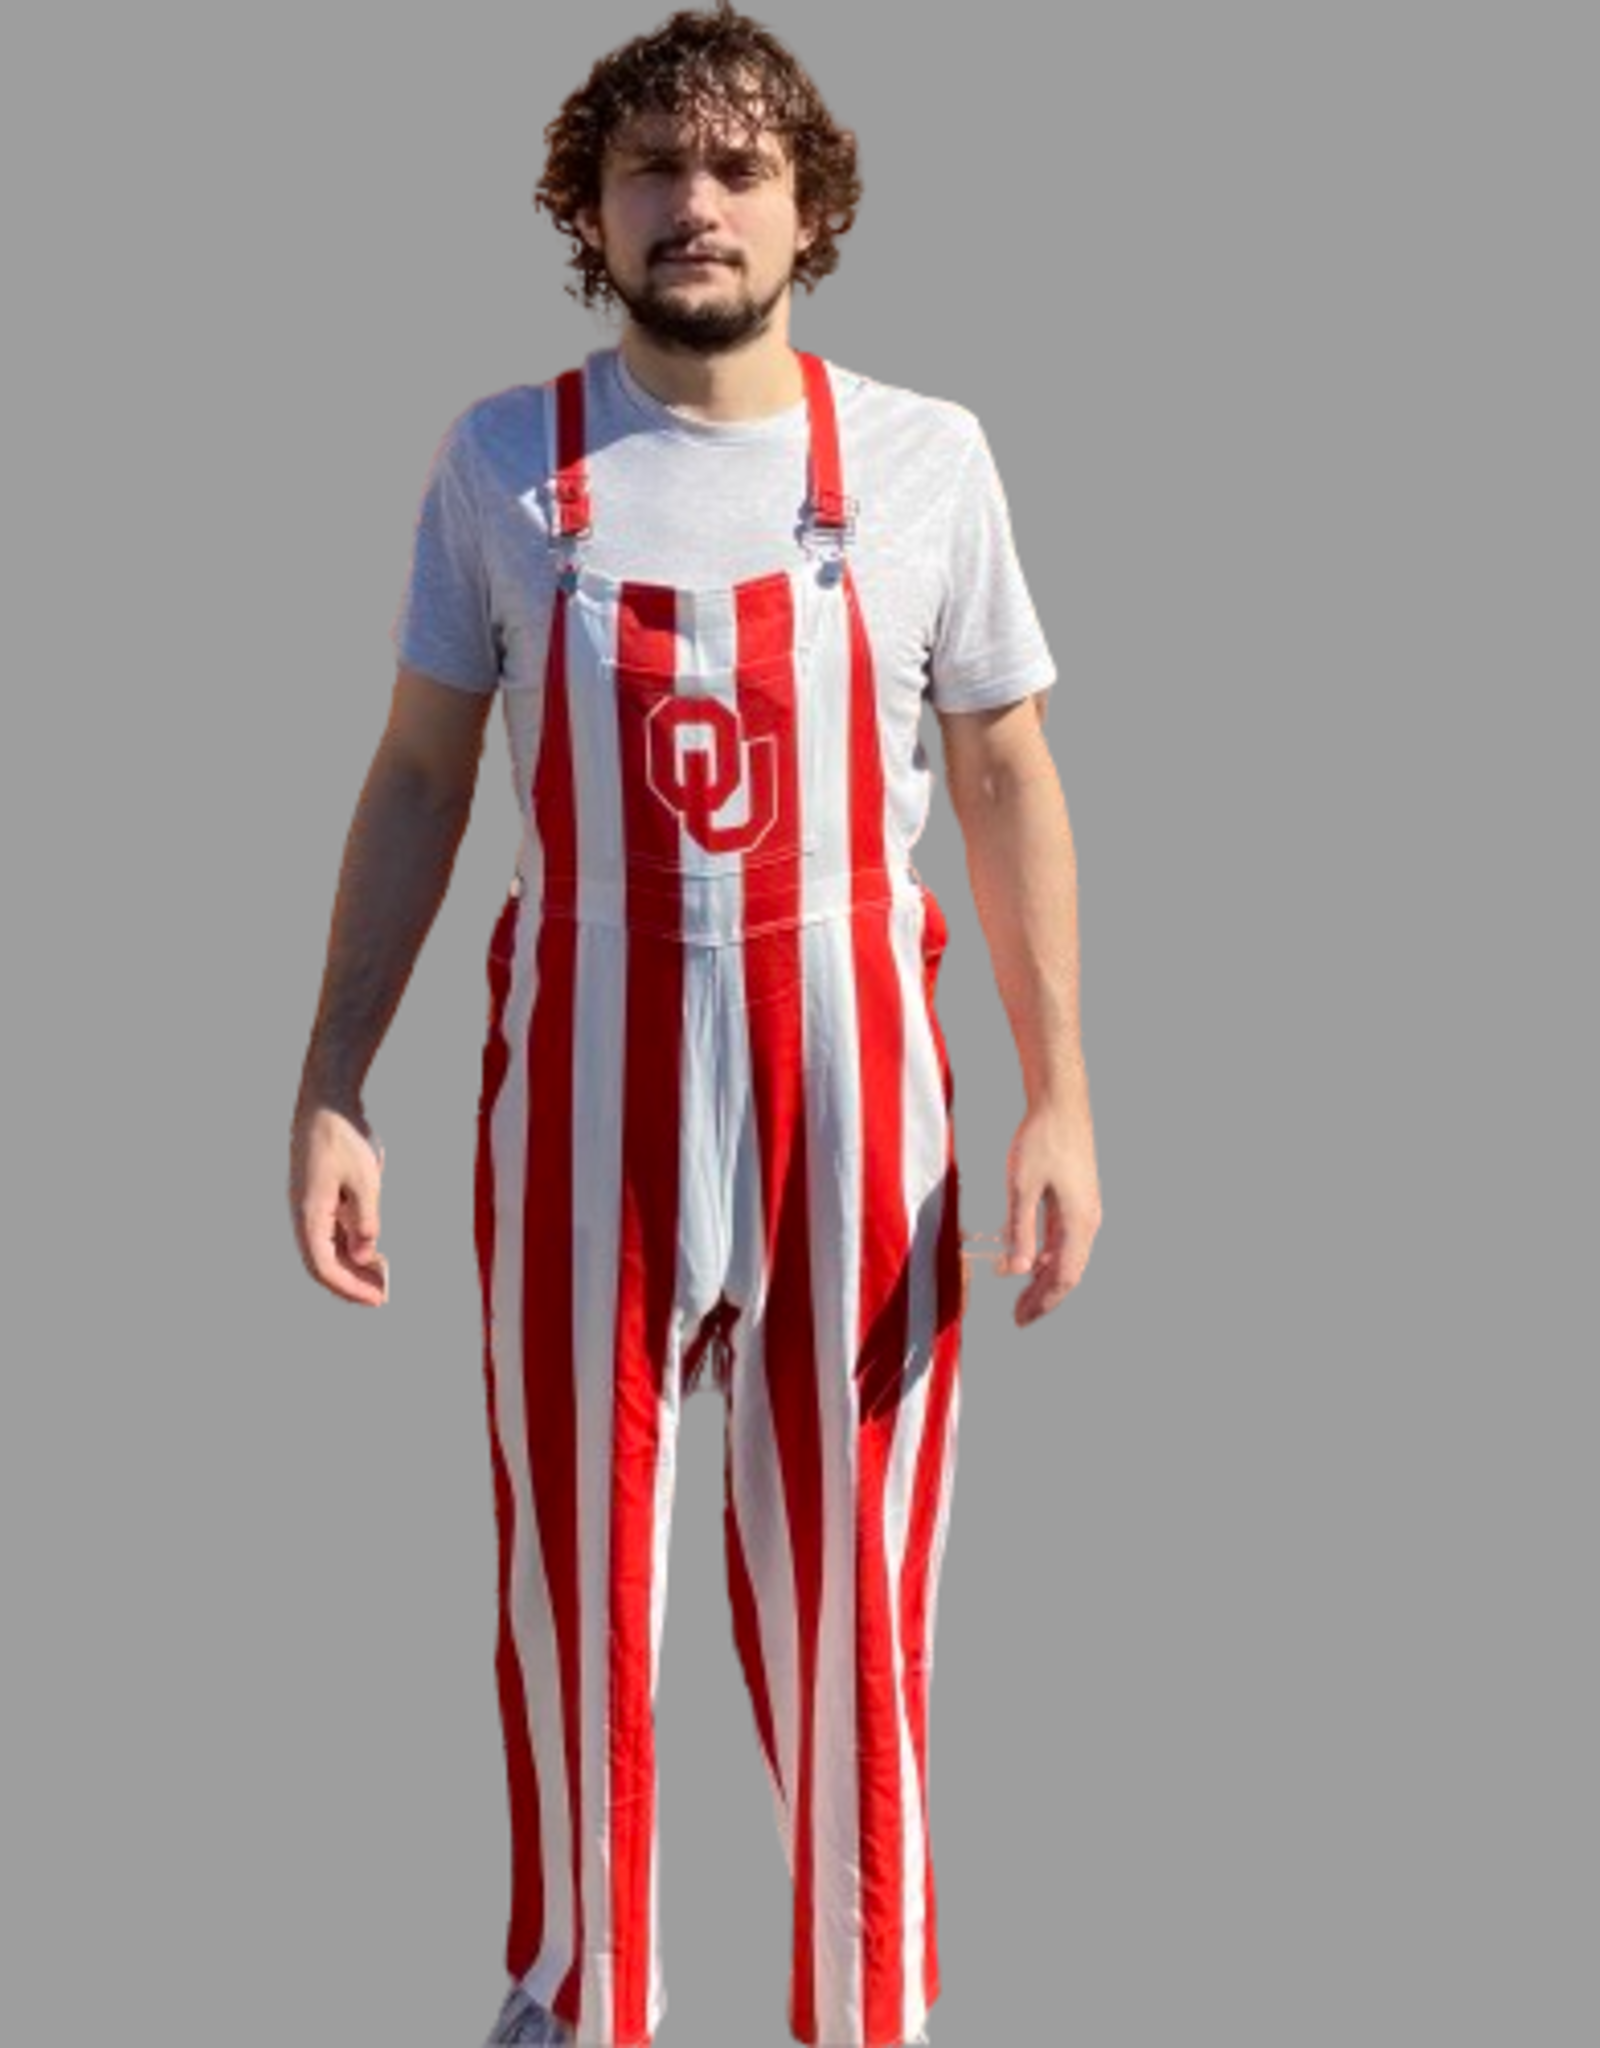 Gameday Overalls Unisex OU Striped Gameday Overalls